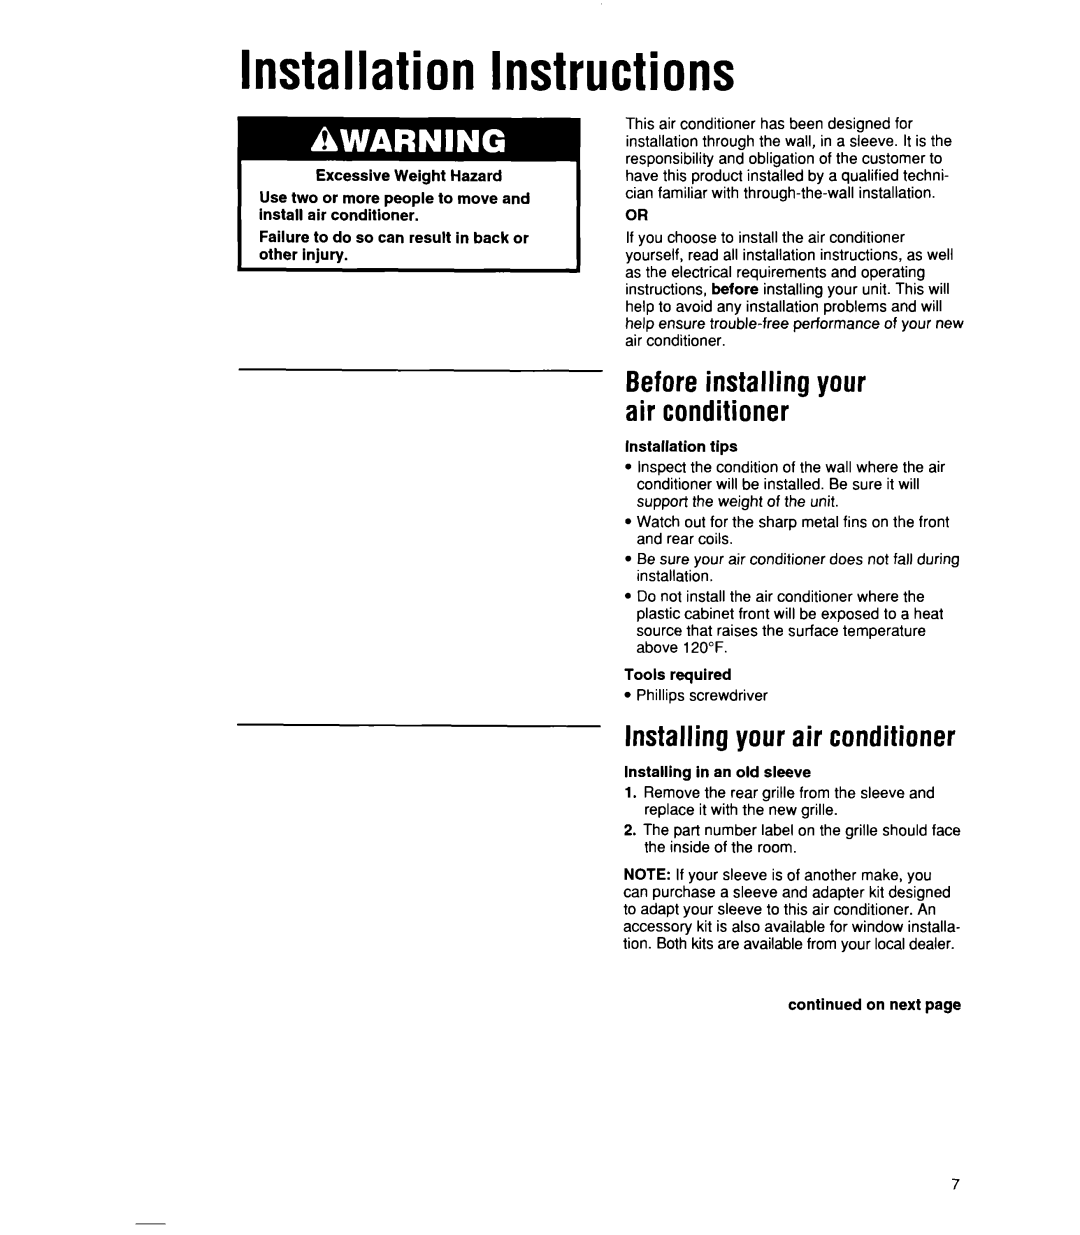 Whirlpool ACU072XE Installation Instructions, Installing your air conditioner, Beforeinstalling your air conditioner 